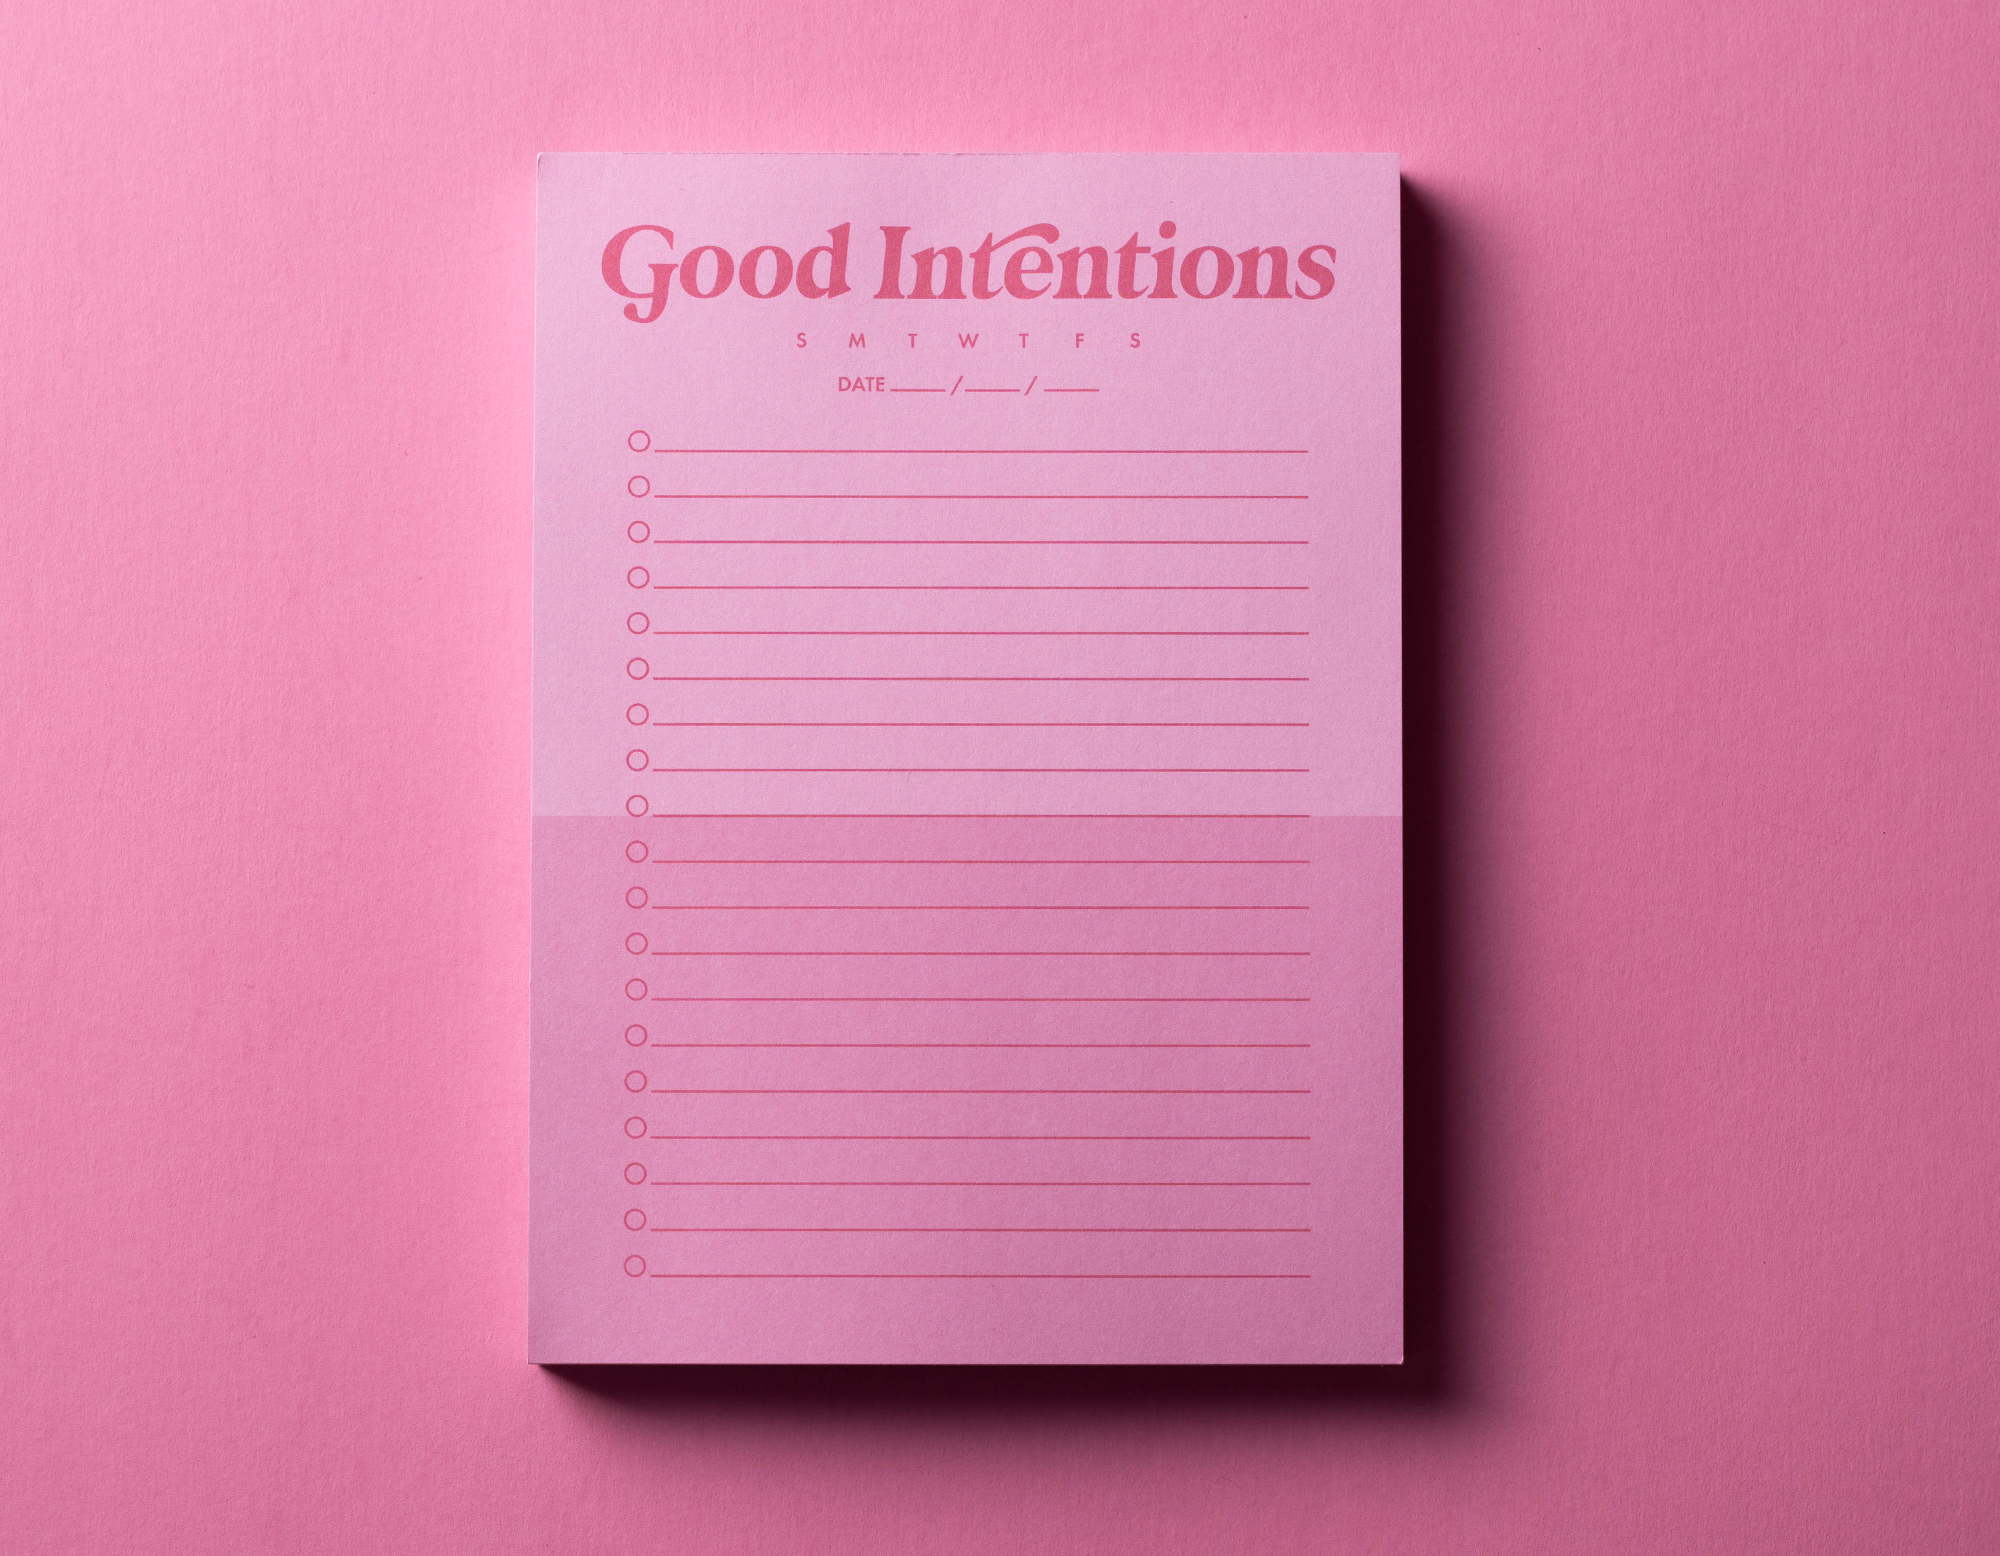 Good Intentions Notepad